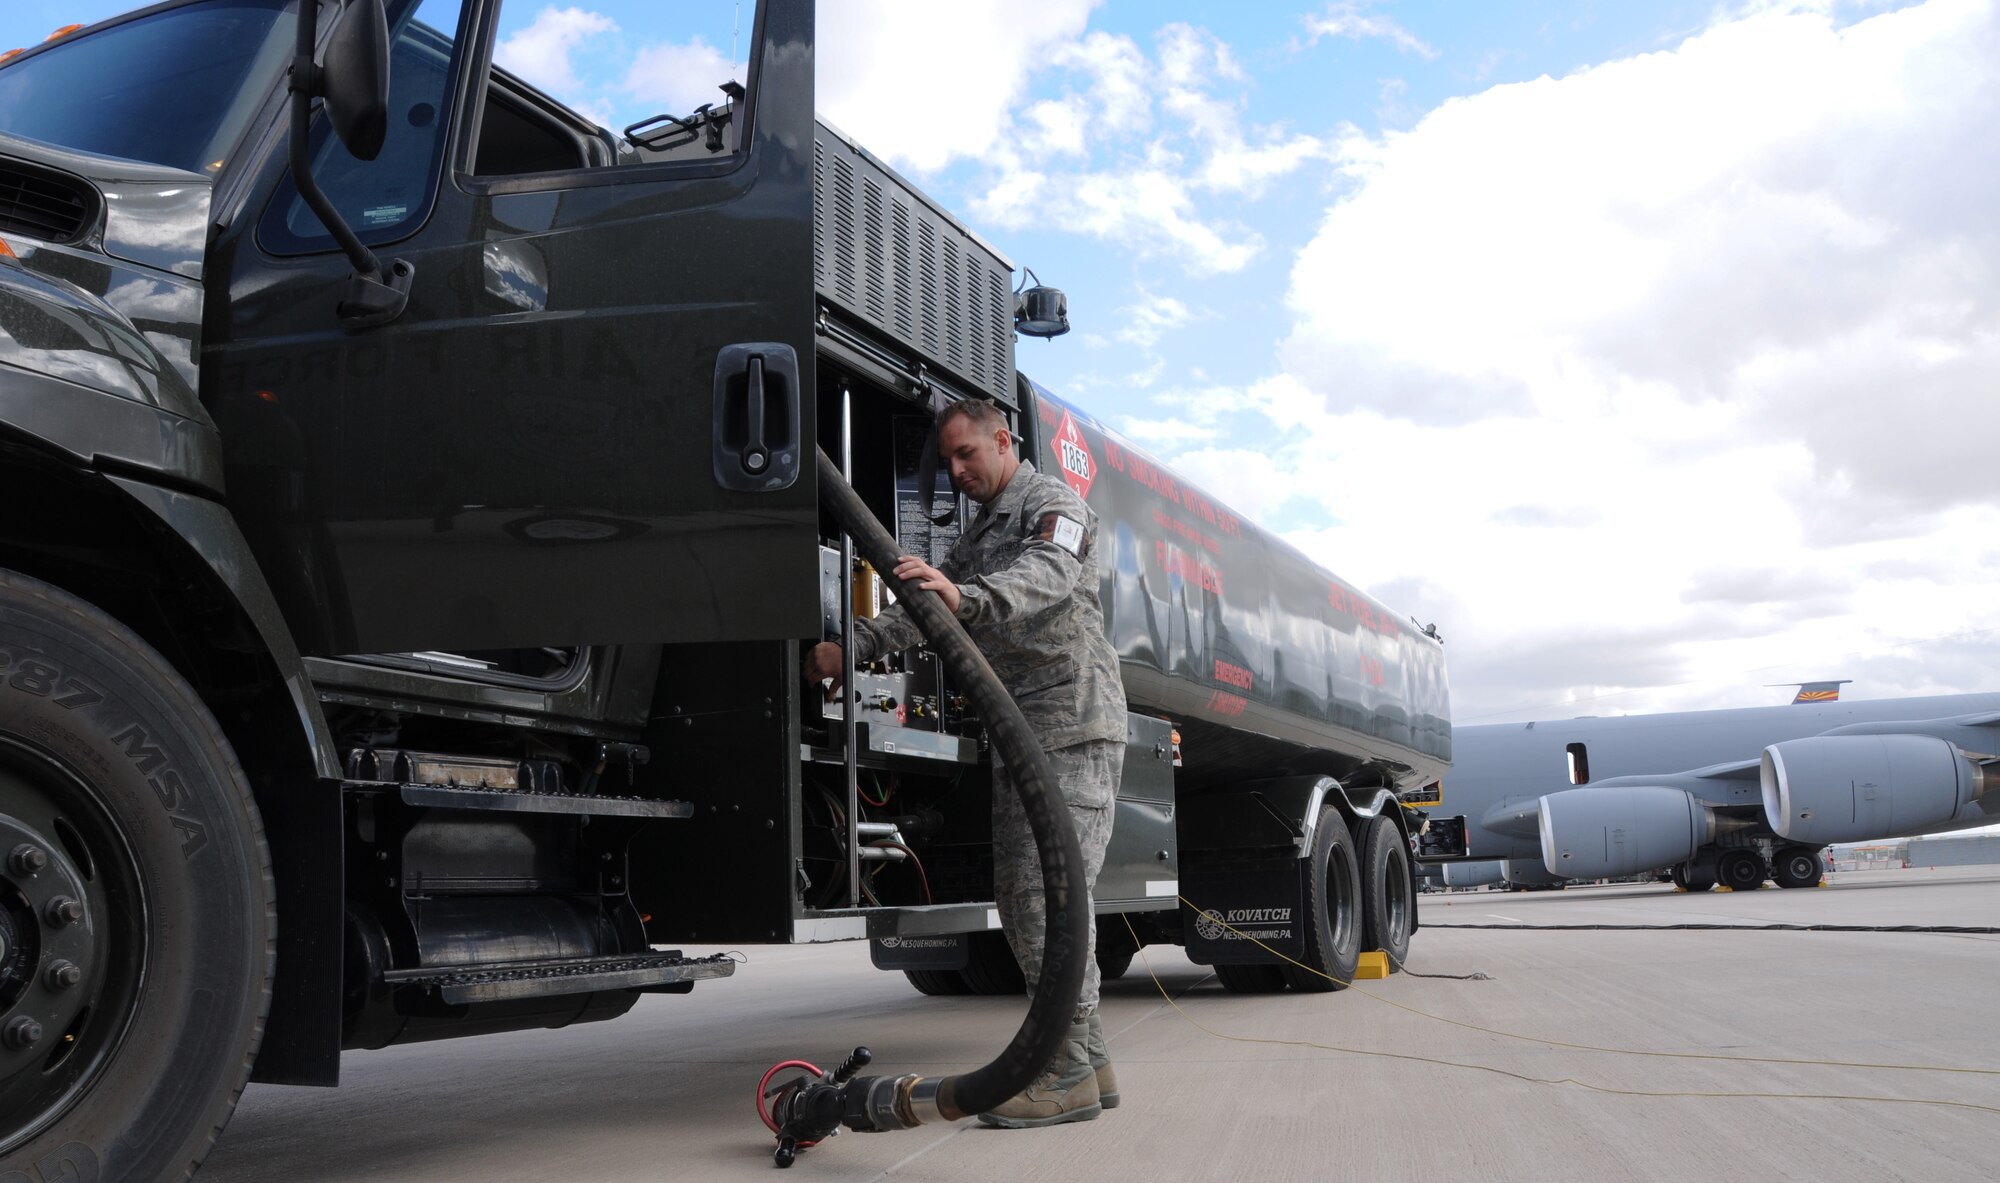 Staff Sgt. Donovan Walden, 161st Logistics Readiness Group fuels technician, wraps up a hose on a fuel truck as part of a routine inspection during an aircraft generation exercise, Phoenix, Nov. 5, 2011. In order to maintain safety on the flightline, these six thousand gallon fuel trucks are inspected daily for leaks and cracks in the pipes. (U.S. Air Force Photo by Staff Sgt. Courtney Enos/Released)